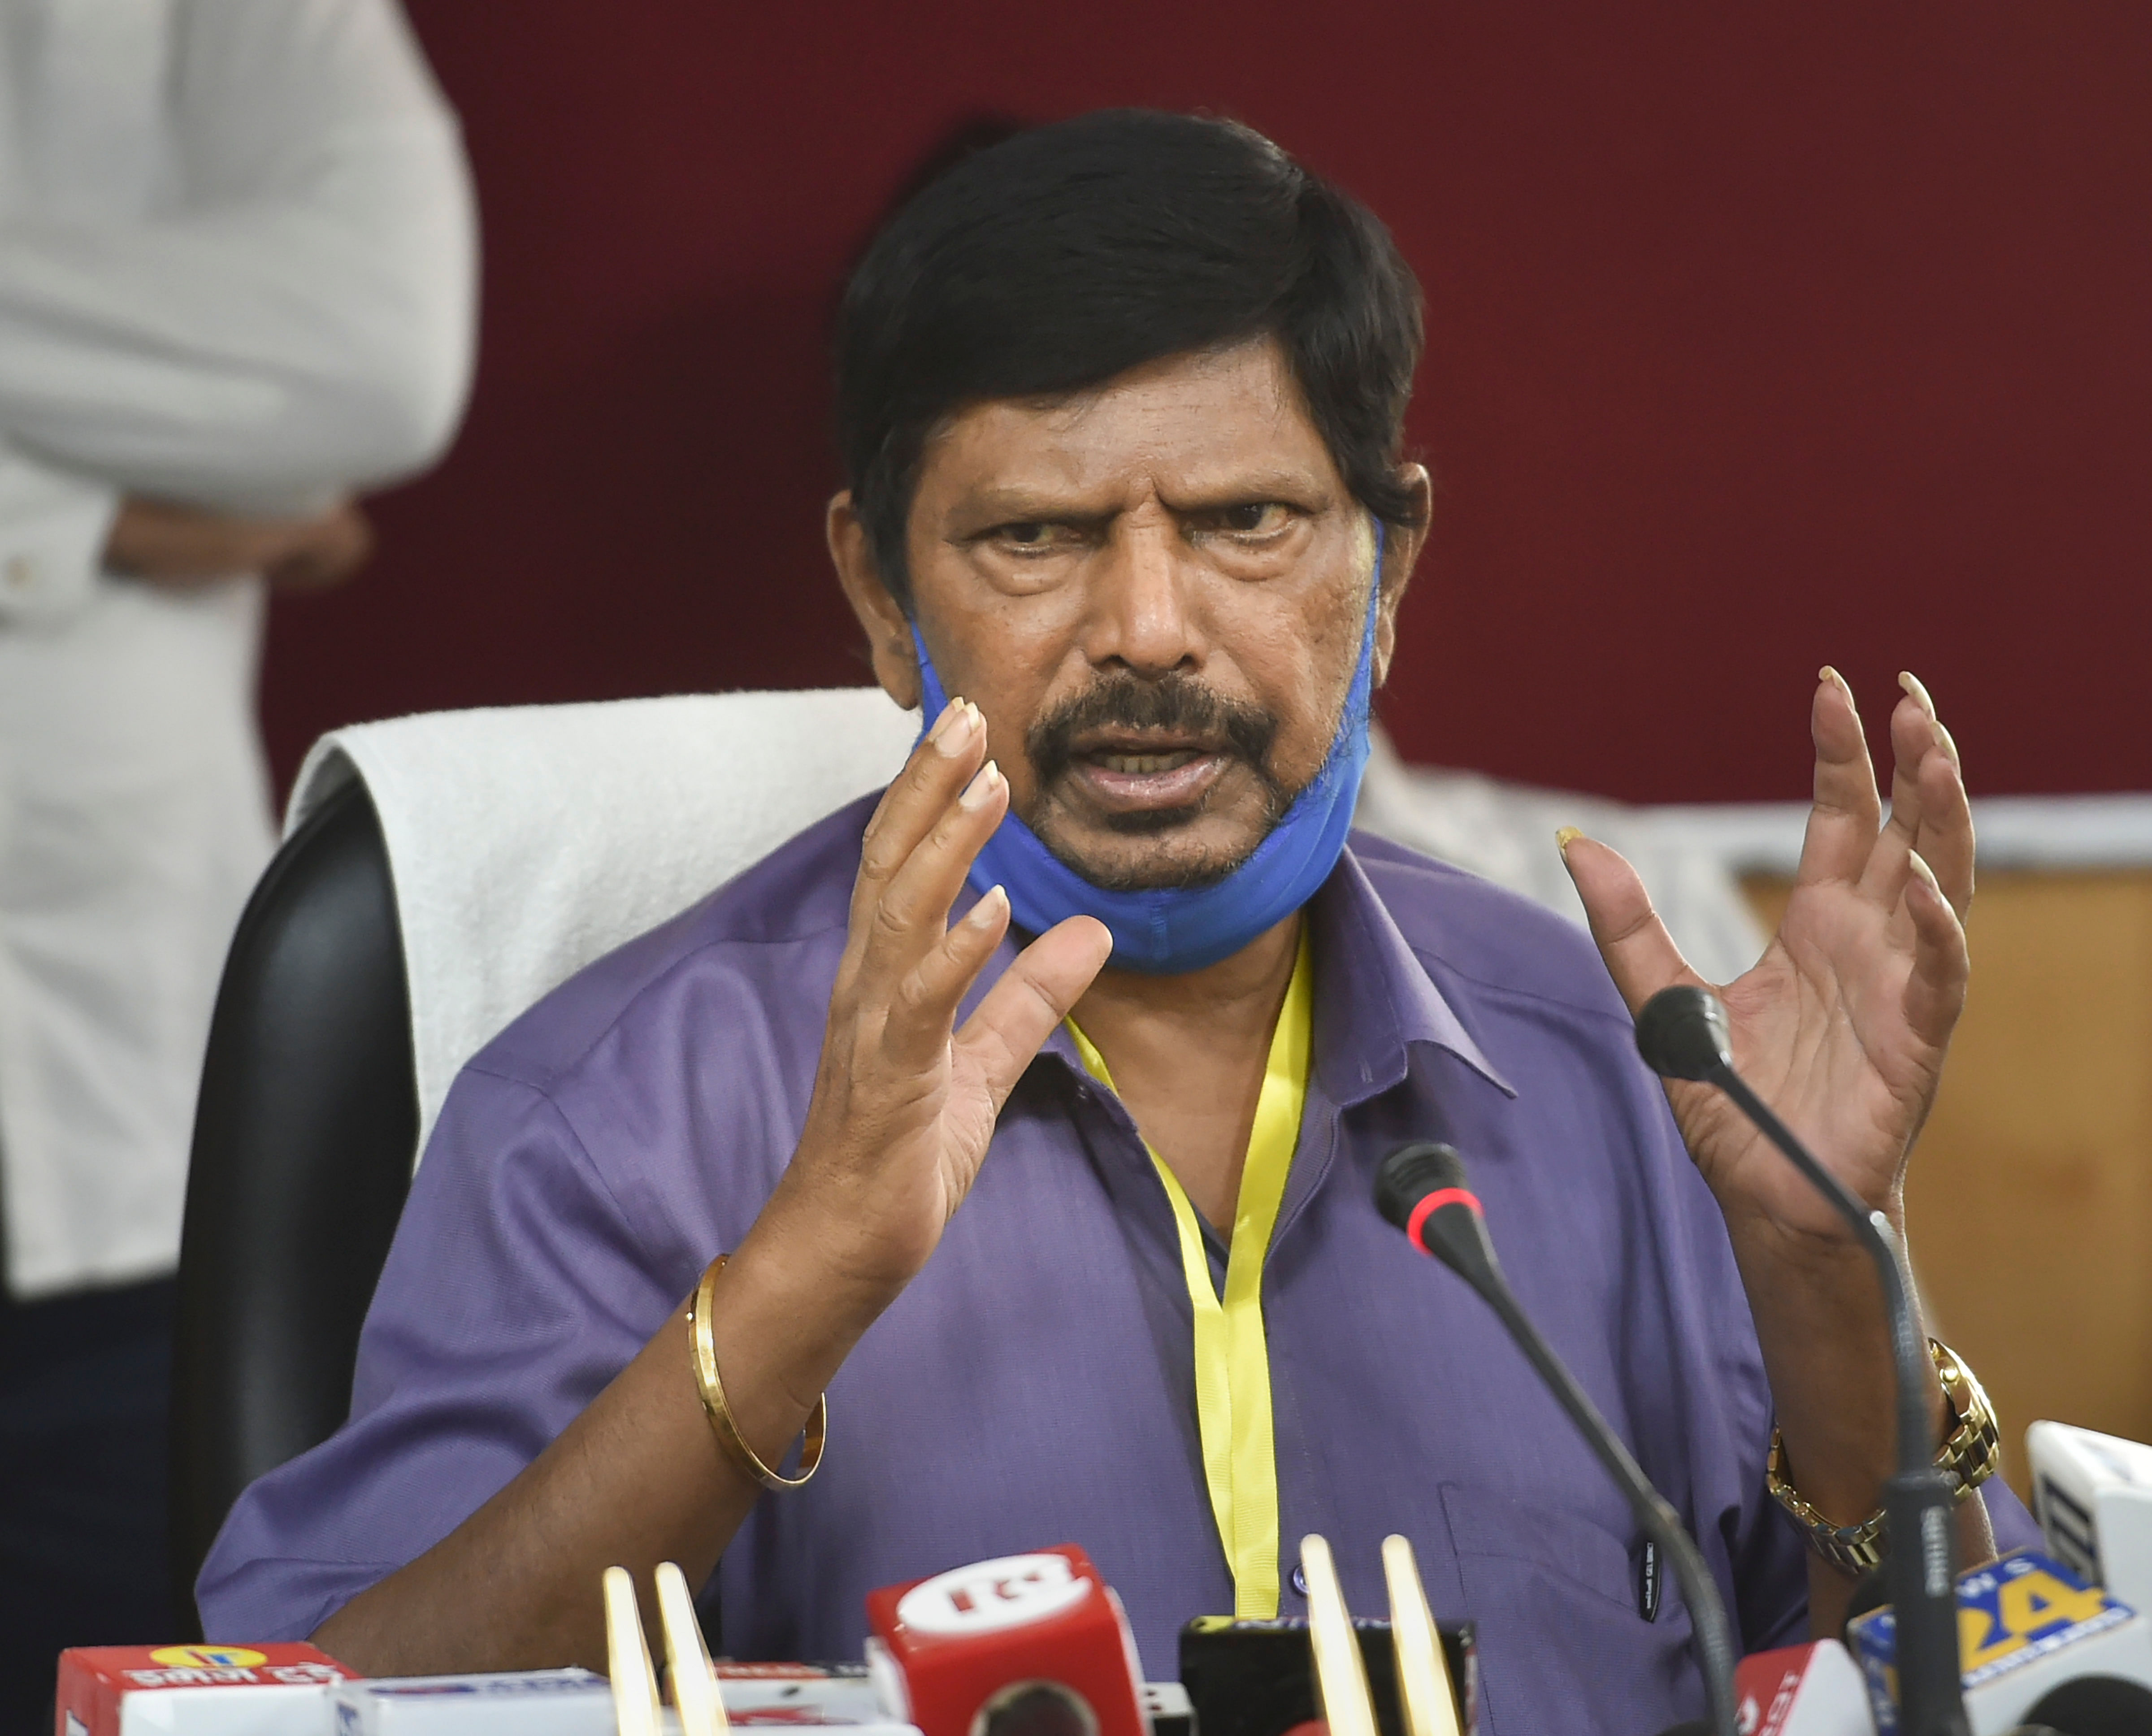 Union Minister and President of Republican Party of India Ramdas Athawale. Credits: PTI Photo